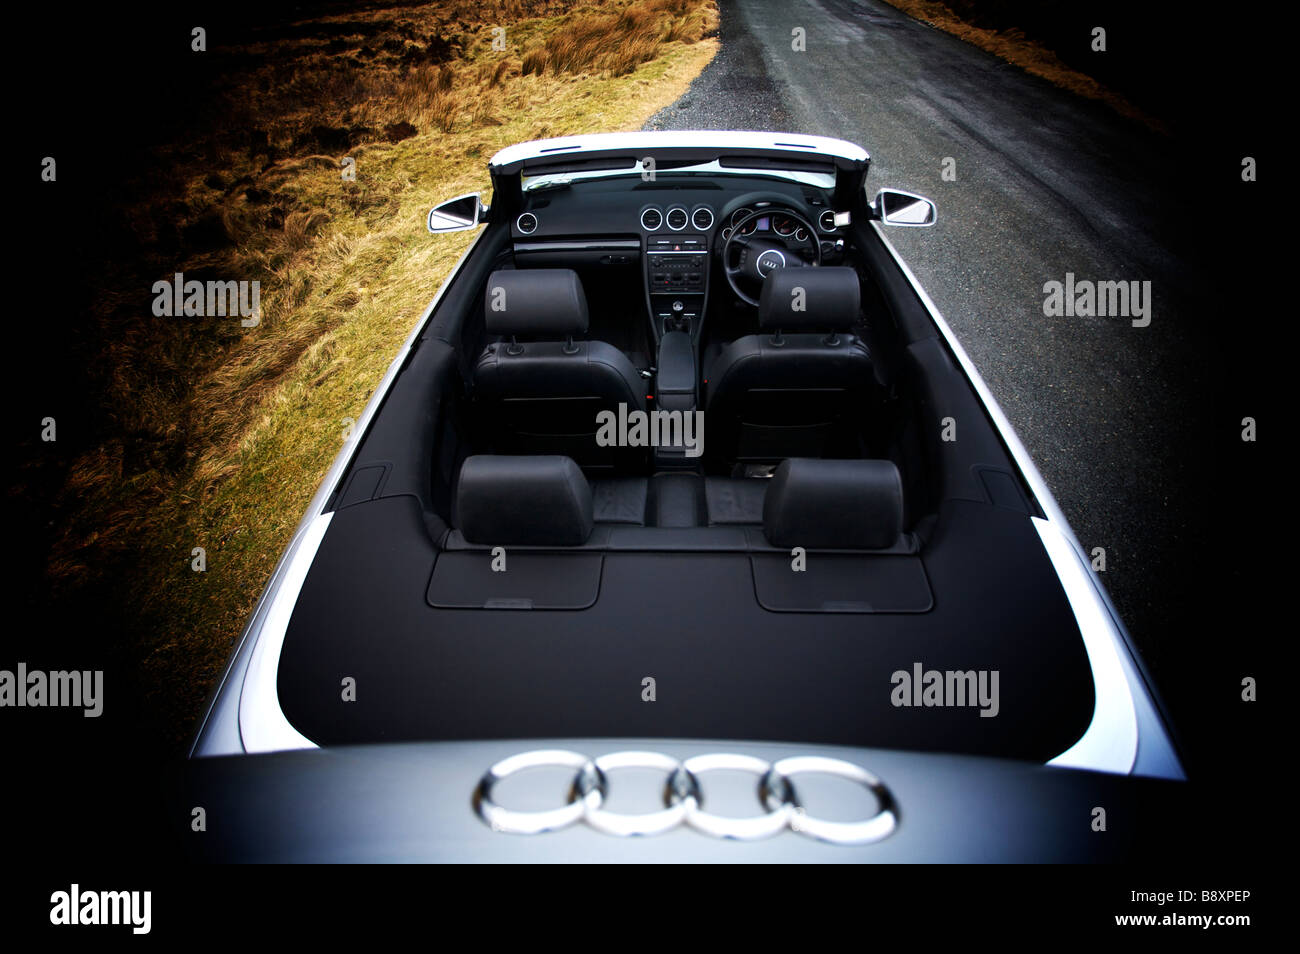 Top view of a silver Audi A4 Cabriolet 1.8T car parked vignette with black leather interior Stock Photo